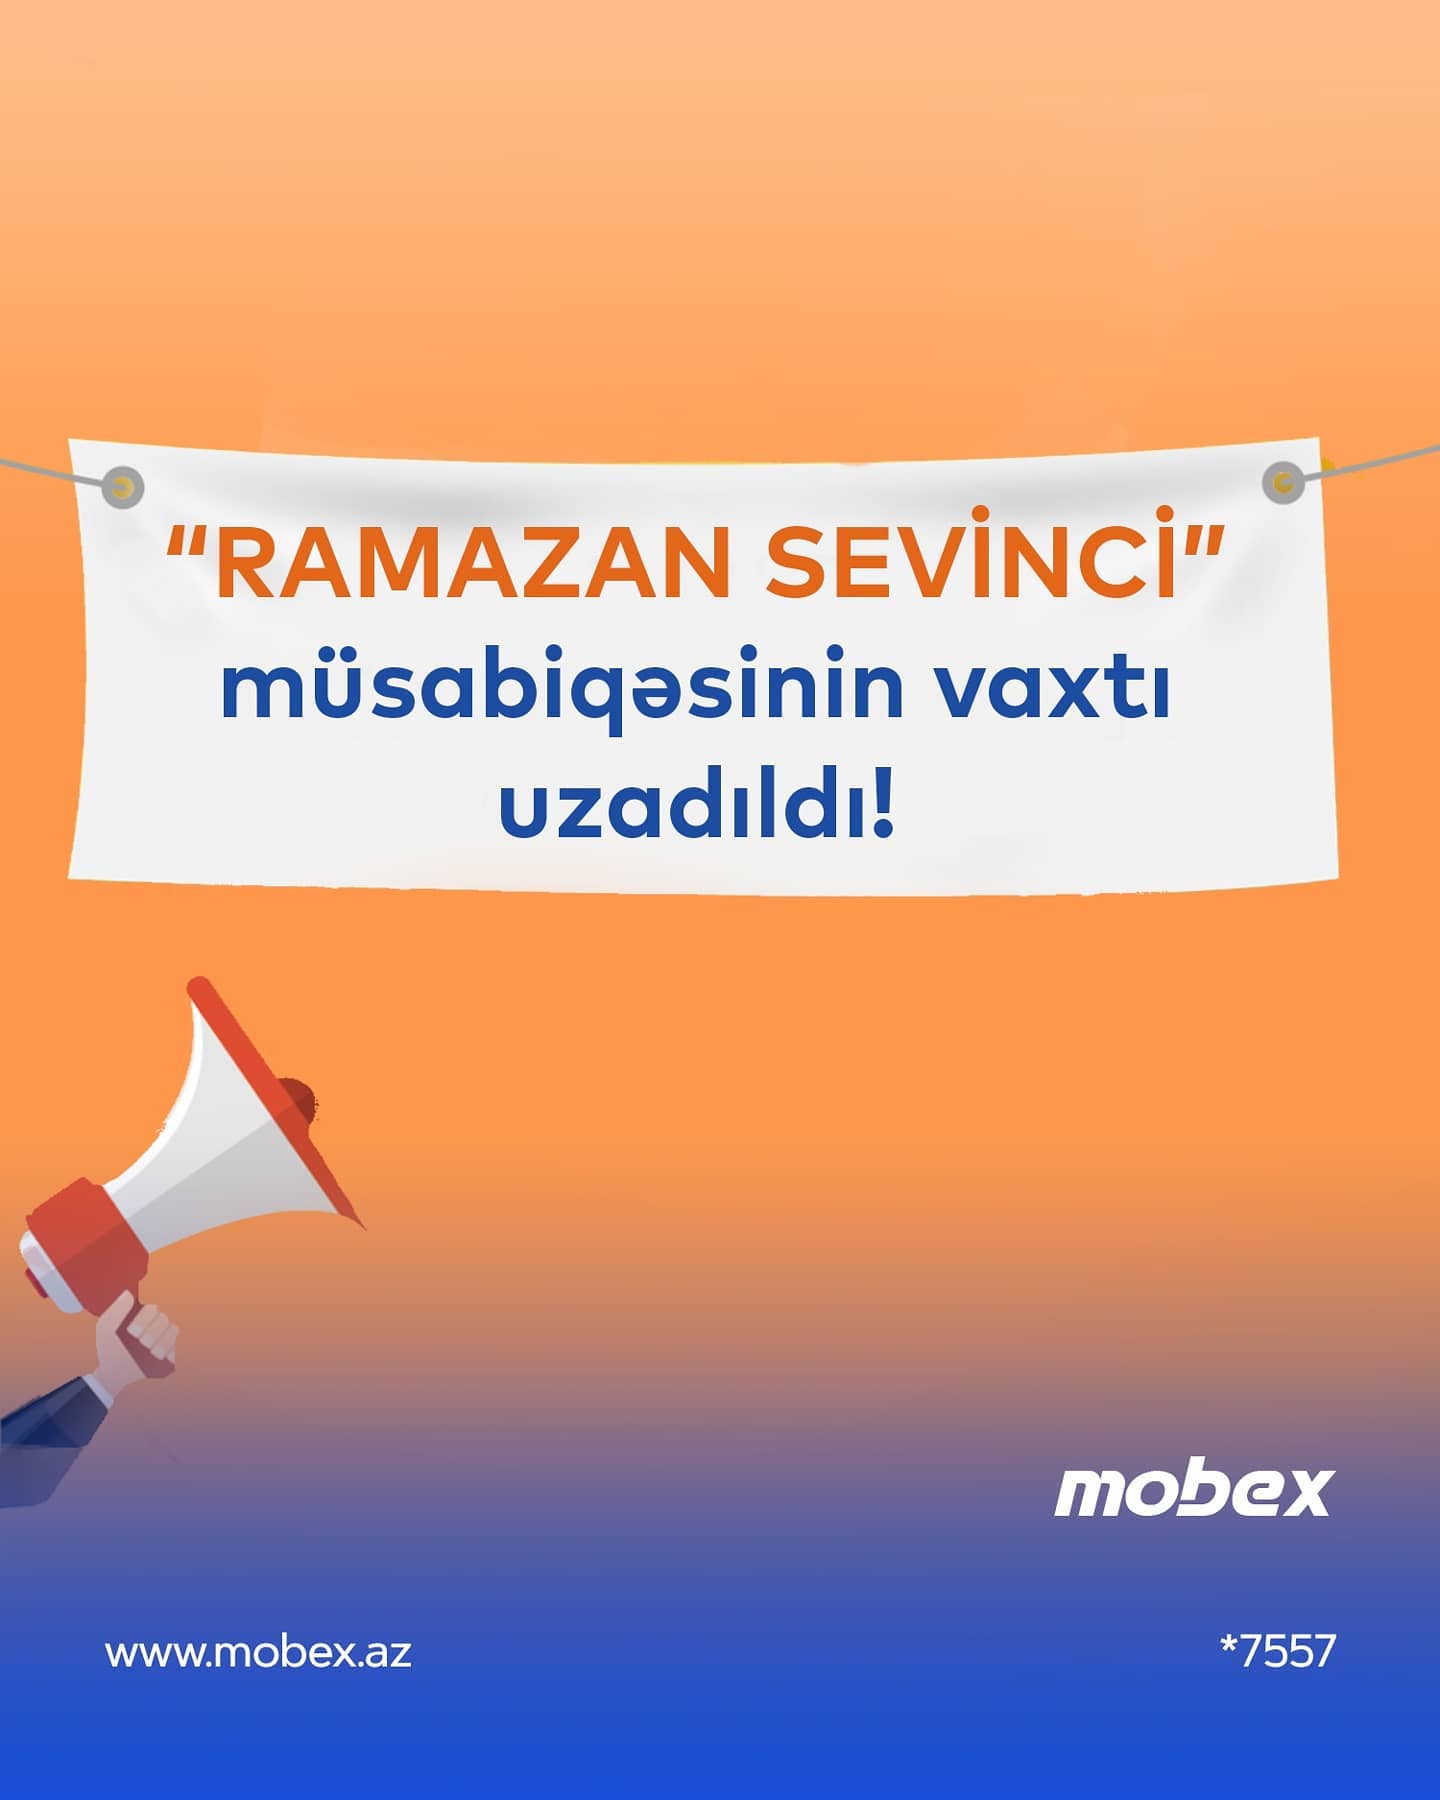 THE DURATION OF THE “RAMADAN JOY” CONTEST HAS BEEN EXTENDED!